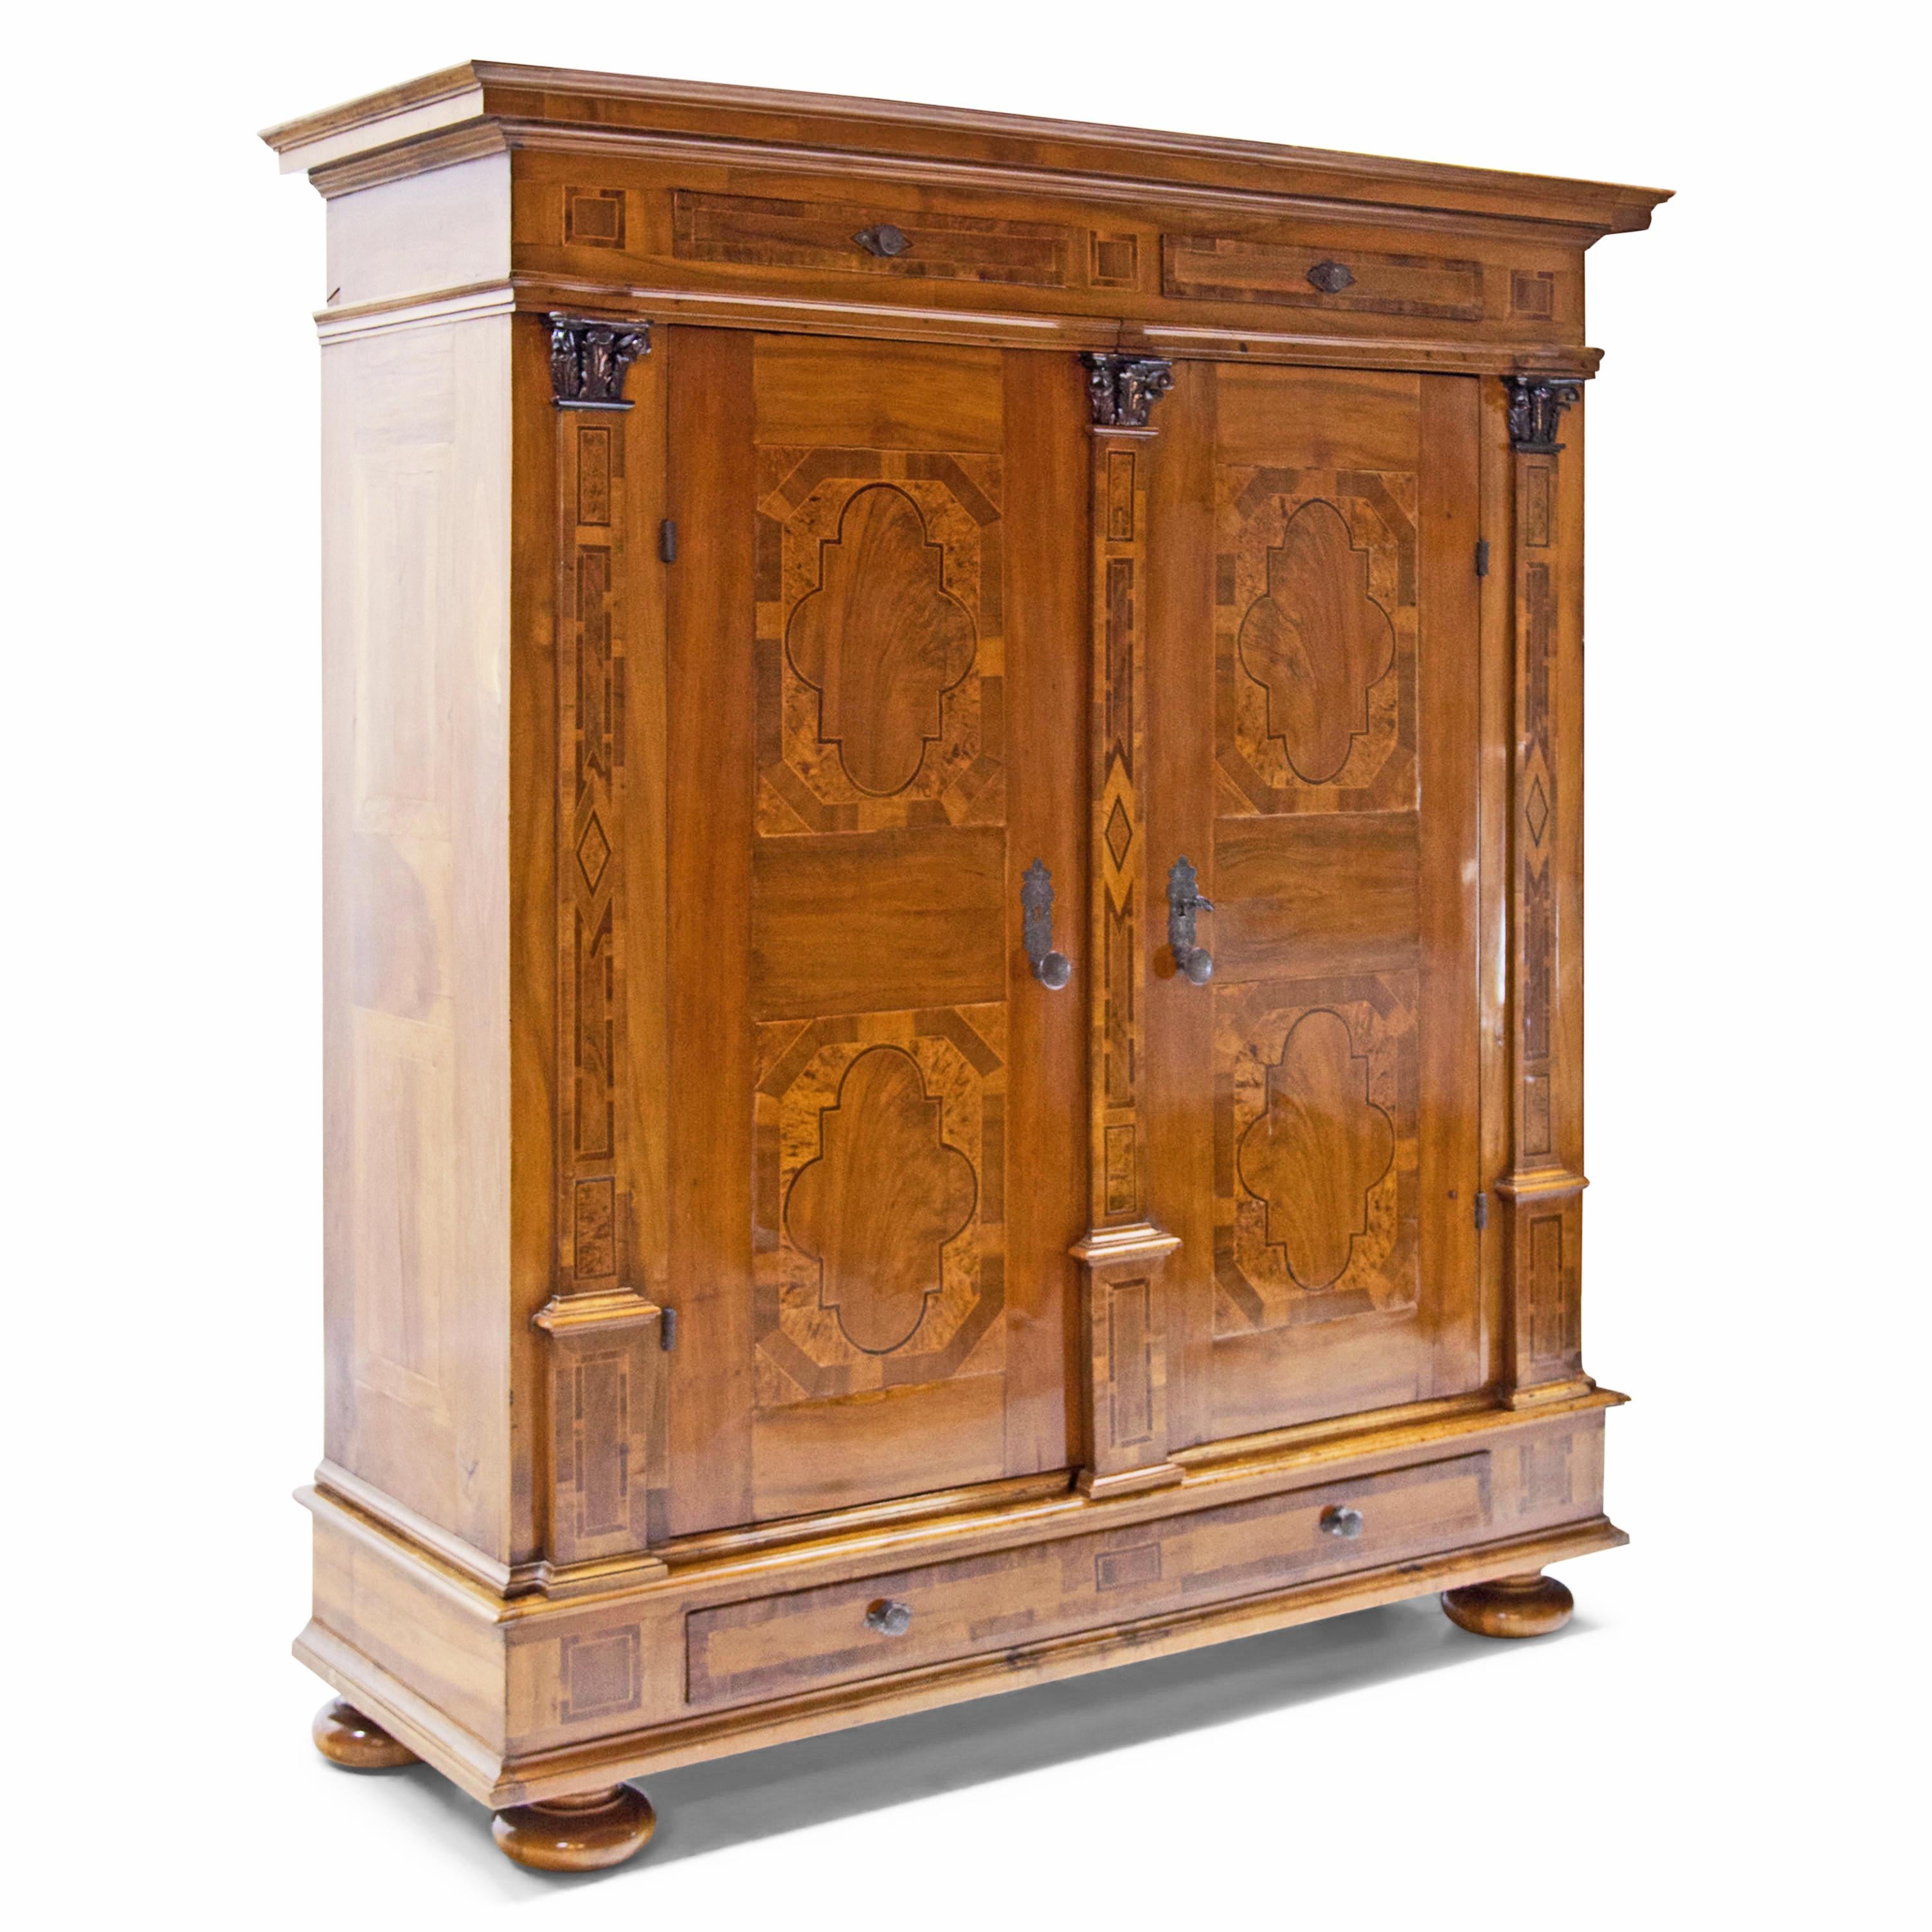 Two-door walnut veneered Baroque cabinet standing on bun feet, the base is fitted with two narrow drawers between profiled strips. Above it the body is divided by three pilasters with carved acanthus leaf capitals and thread or ribbon inlays. The